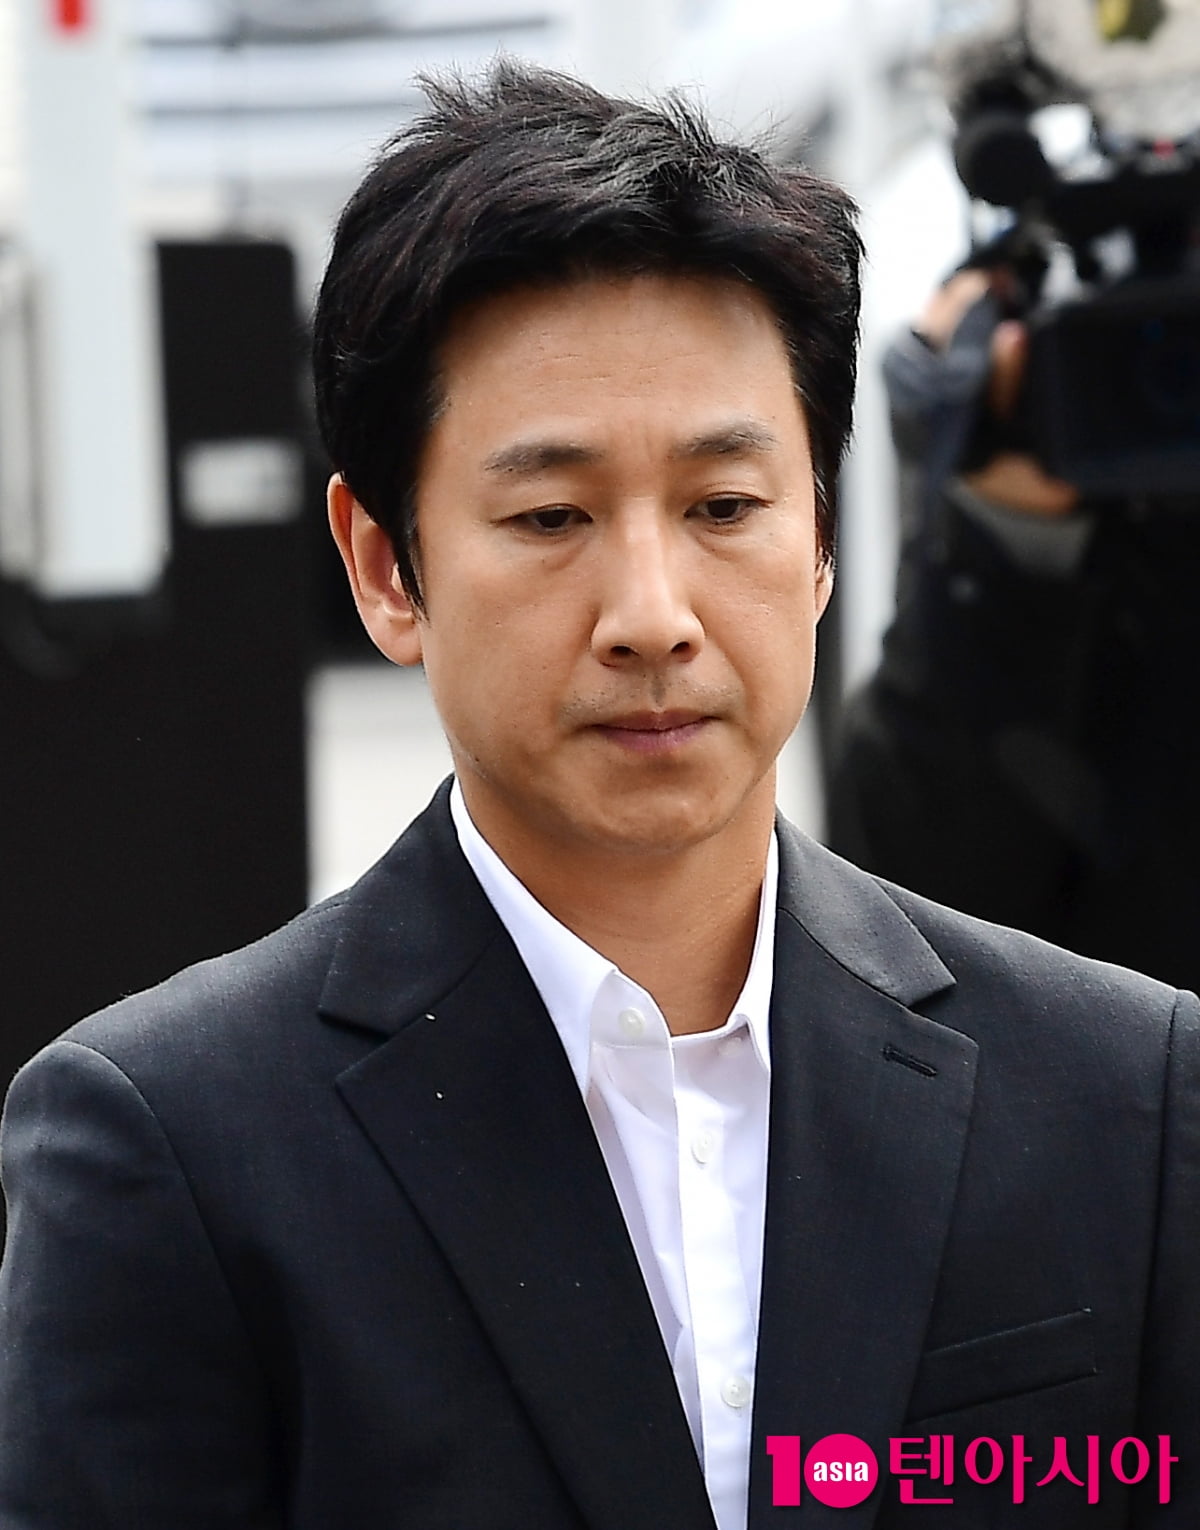 Lee Sun-gyun re-appears at police on suspicion of drug use... Just one week